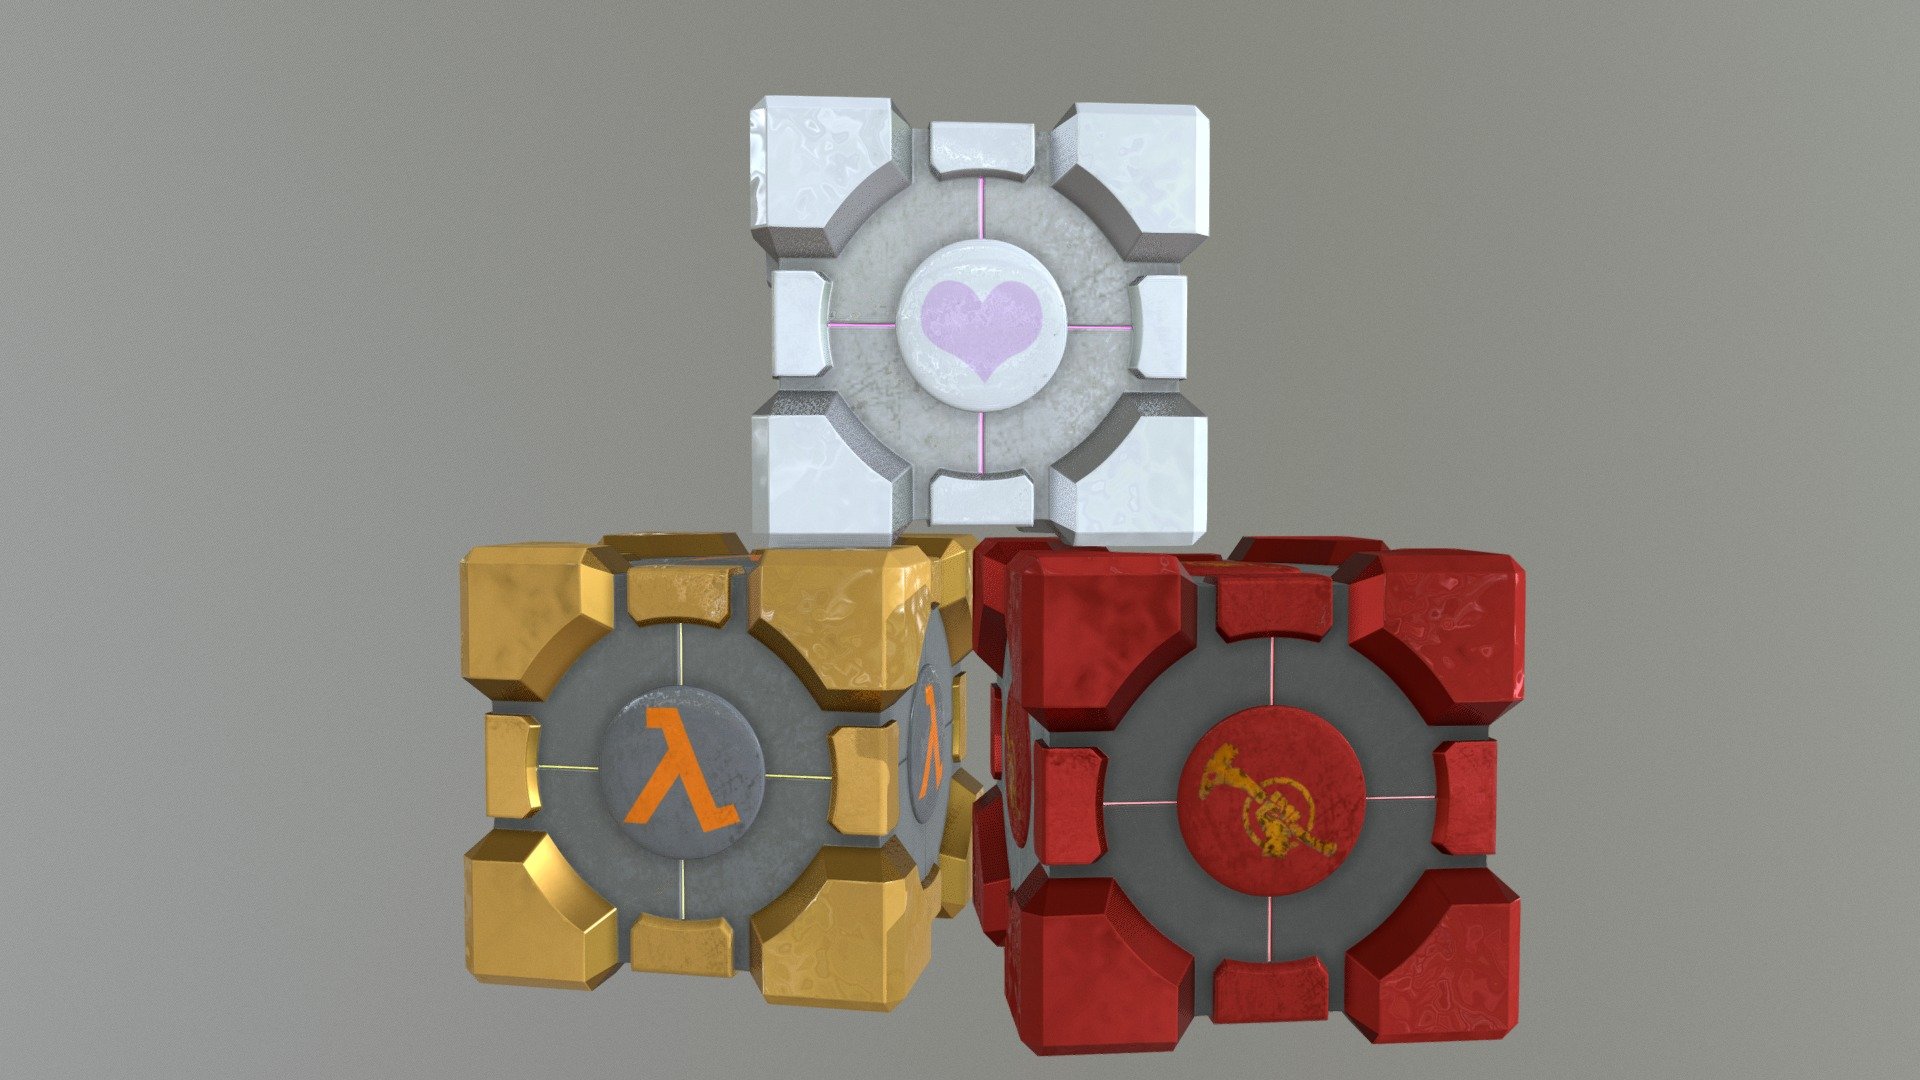 Some fan art for some of the best games I’ve played. Not exactly indie games, so I’m sure most can pick out which games these are but for clarification Top: Portal, Bot Left: Half life, Bot Right: Red Faction.

Specifics
Samples: 125
Render time: 8 minutes
Software: Blender 3D Version 2.78, Gimp Version 2.8

Resources and References 
•   Image of Companion cube texture.
•   Image of Lambda symbol from Pixabay  - https://pixabay.com/en/lambda-orange-greek-mathematics-39473/
•   Image of Red Faction logo 3d model